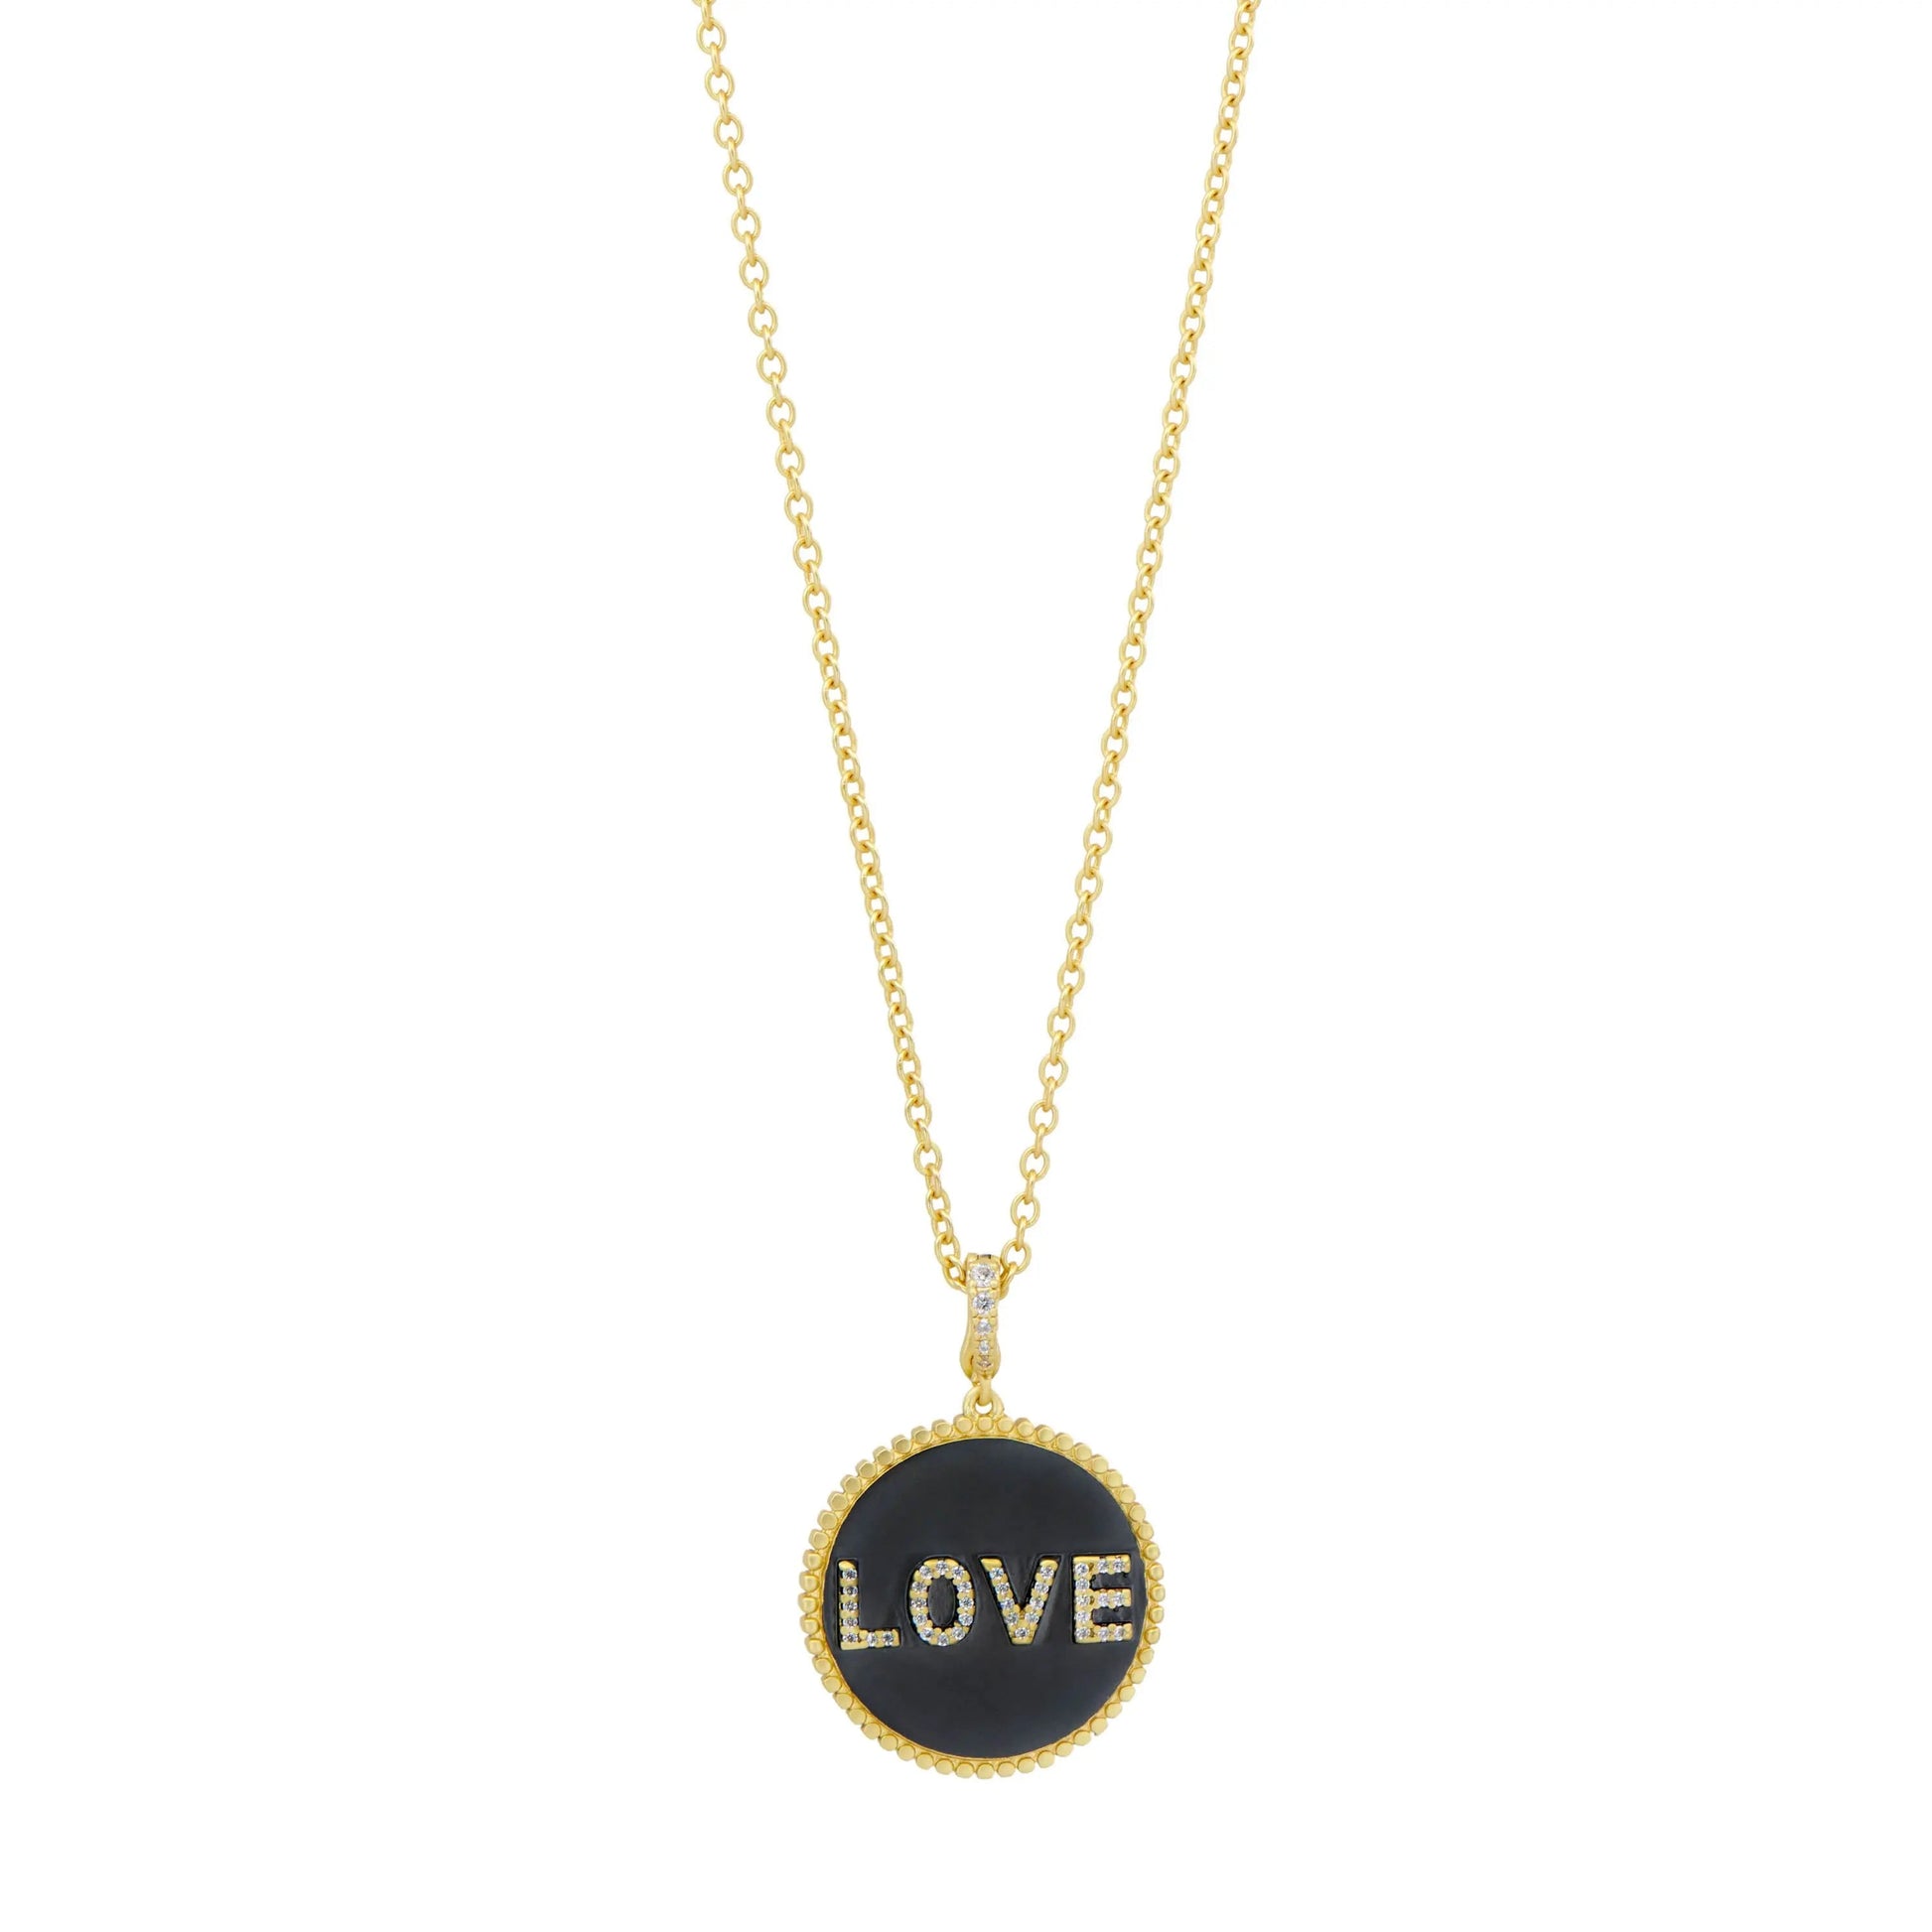 BlackGold Double Sided LOVE Pendant Necklace Women of Strength NECKLACE